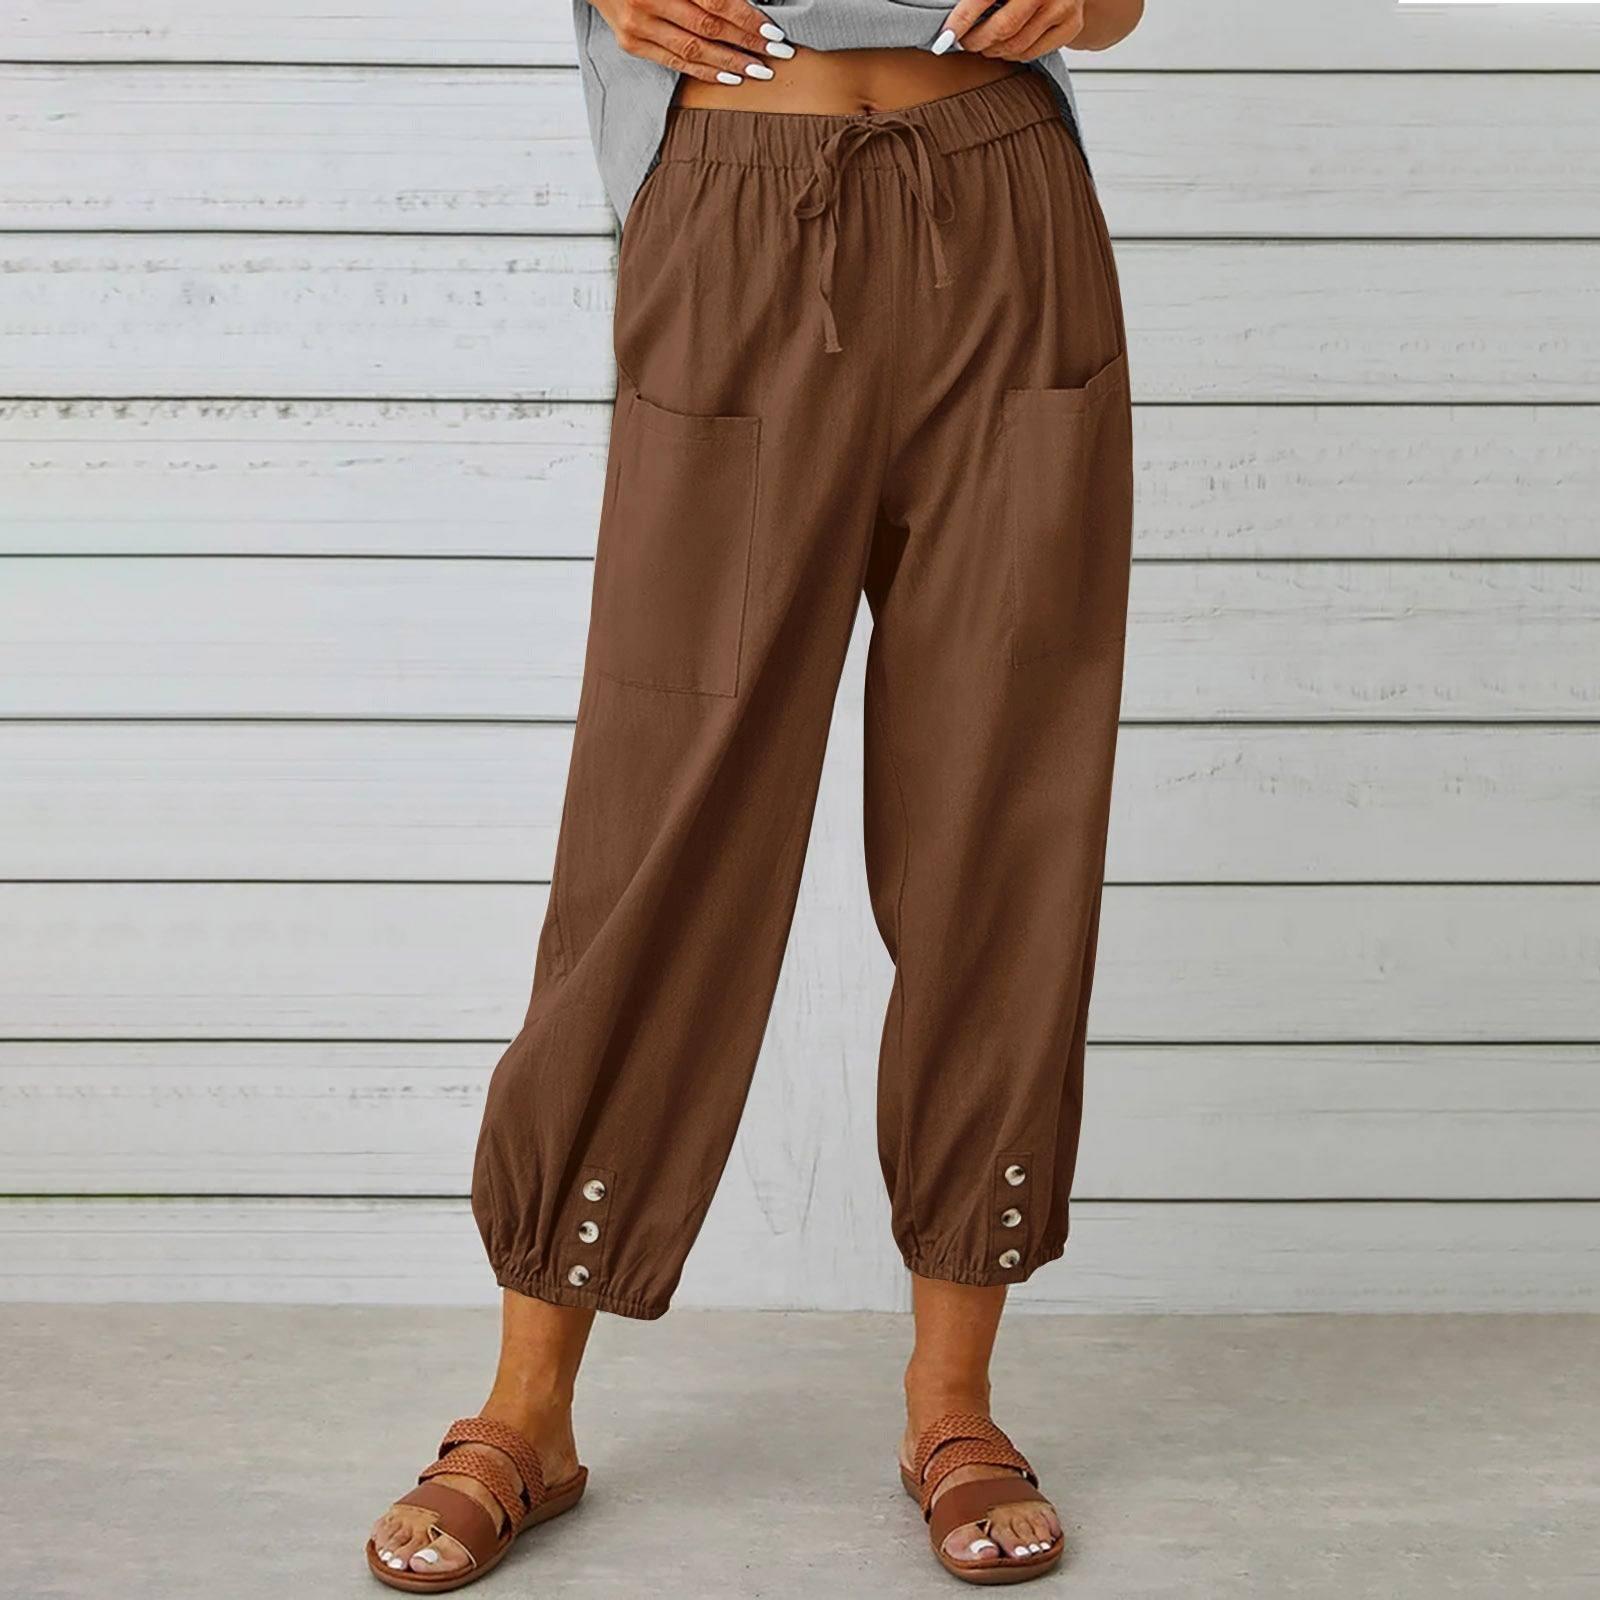 Women Drawstring Tie Pants Spring Summer Cotton And Linen-Brown-12